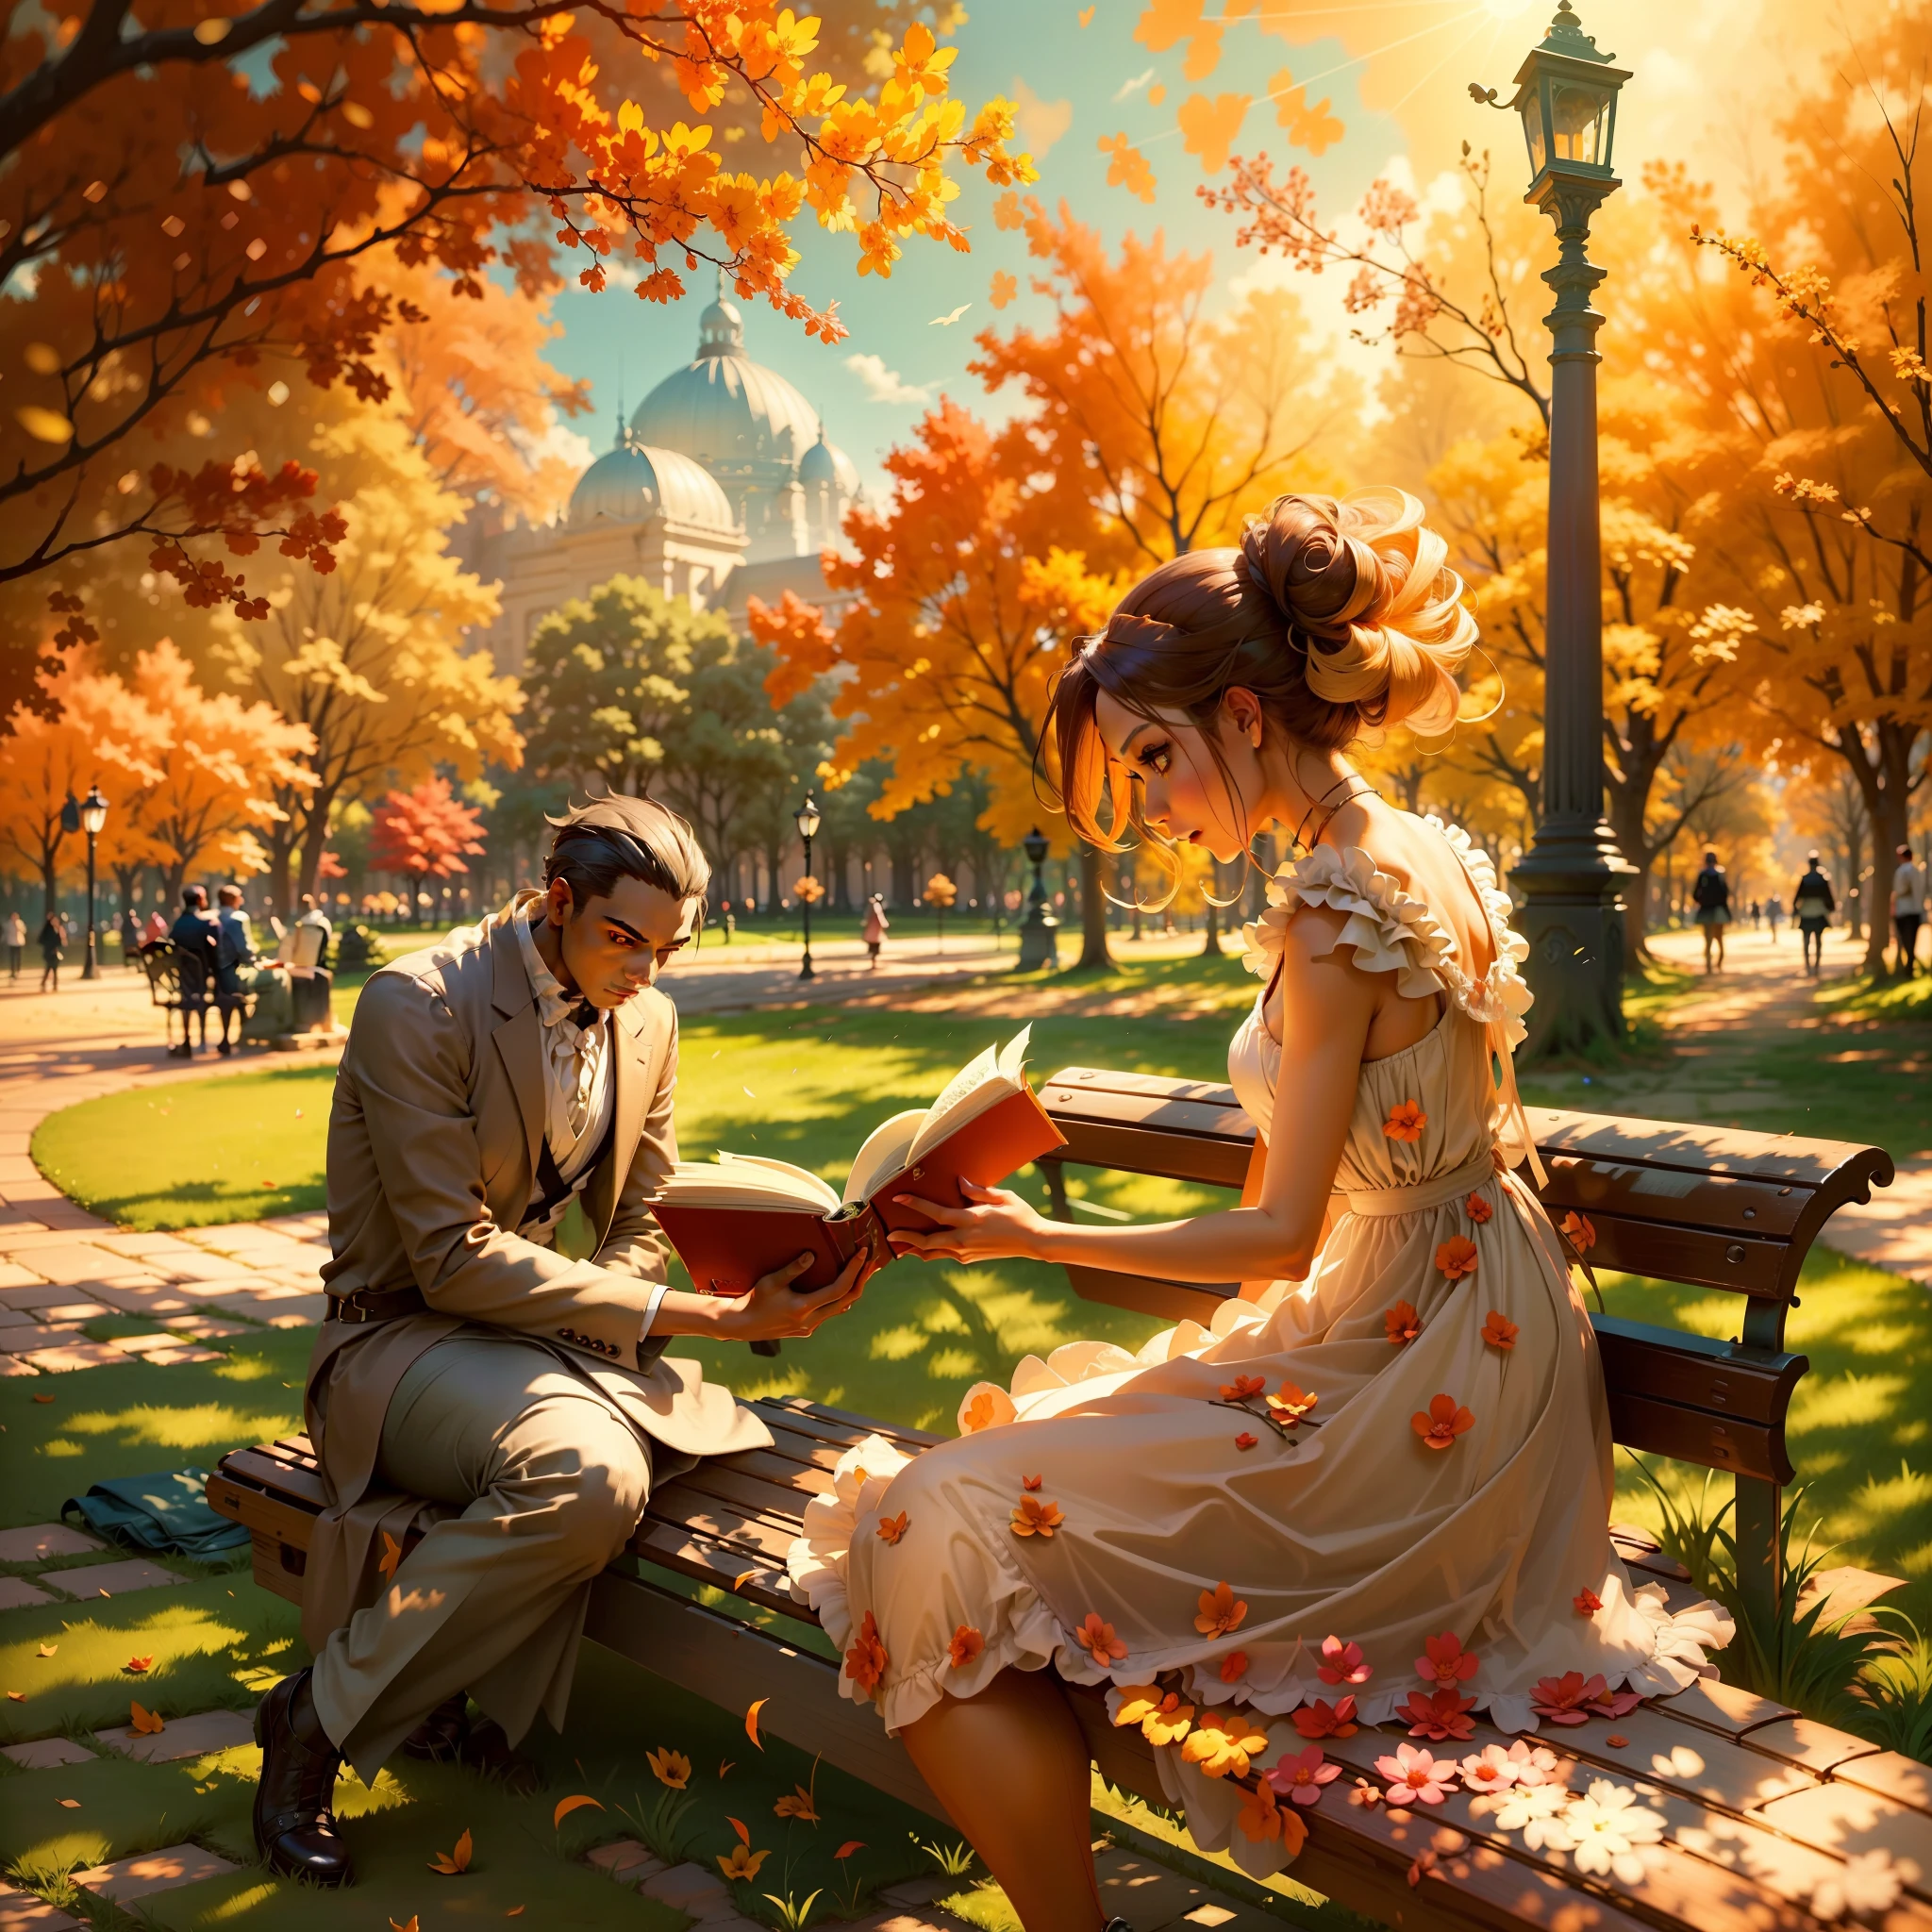 Imagine a scene where a woman is walking through the park on a sunny afternoon. She wears an elegant dress that enhances her beauty, and her curious eyes lock onto a MAN sitting on a bench, completely immersed in a book. Describe the vibrant atmosphere created by the sun's rays in the background.